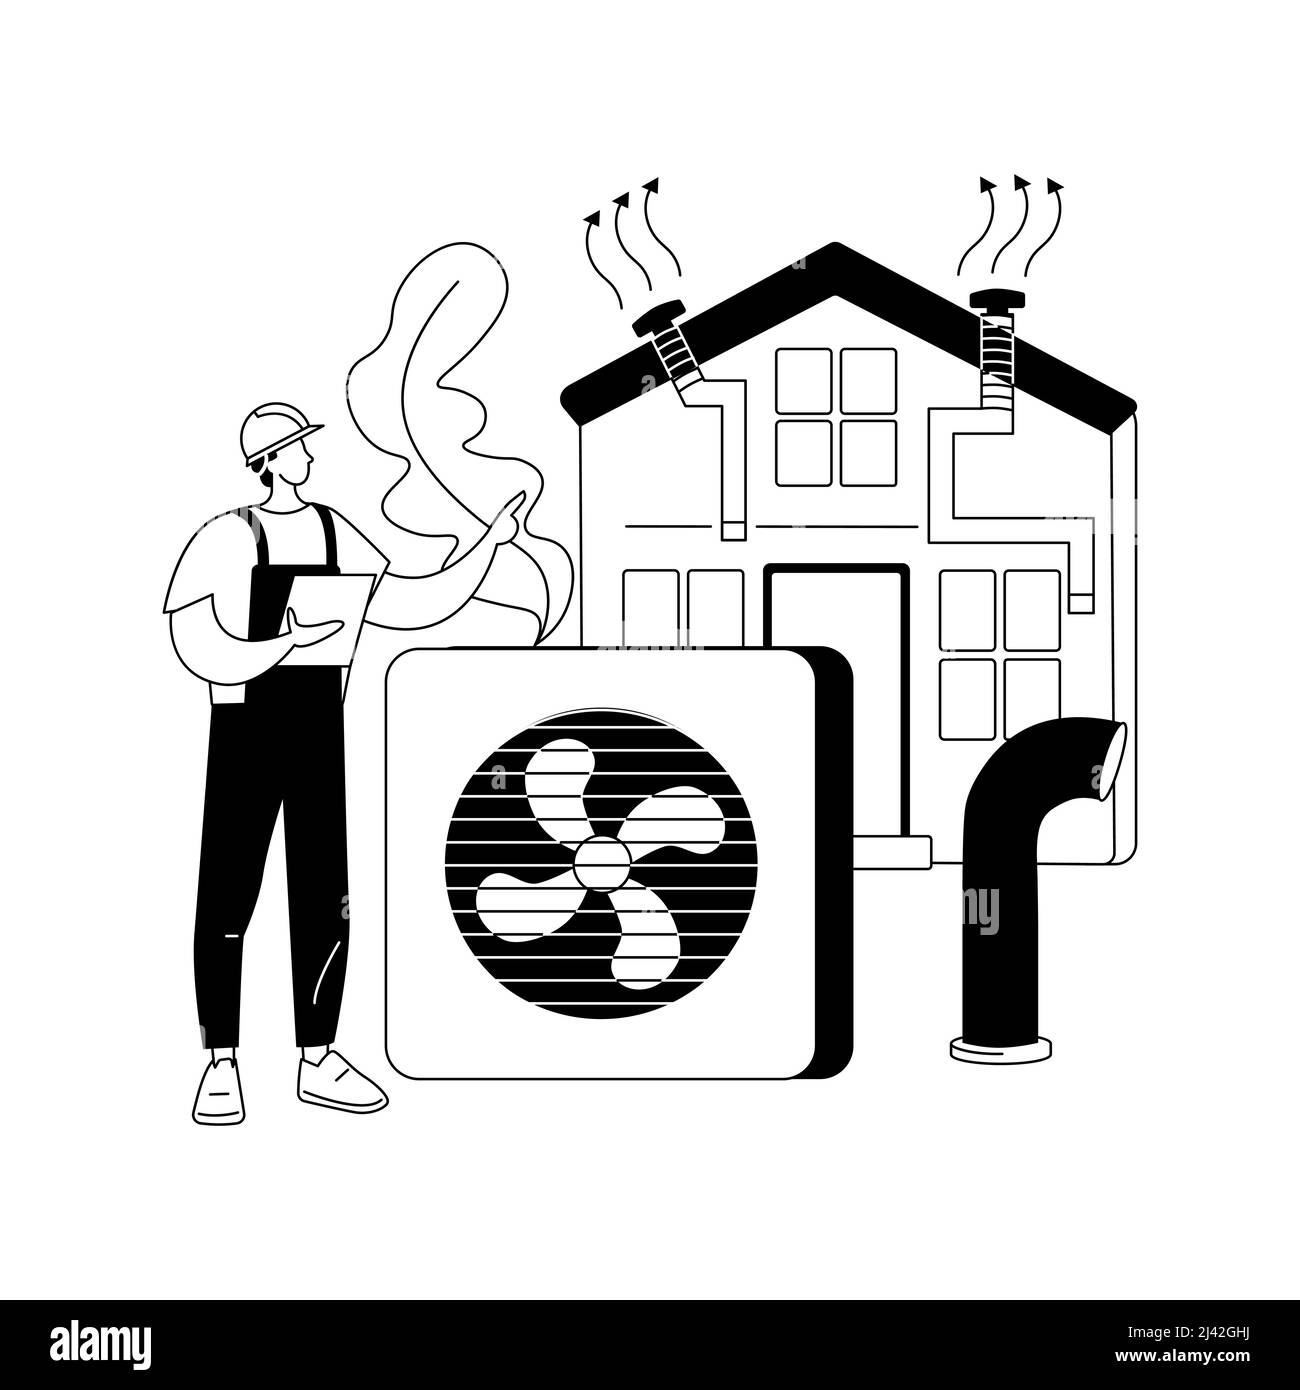 Ventilation system abstract concept vector illustration. Mechanical ventilation, airing and cooling system maintenance, exhaust fan, new air flow exch Stock Vector